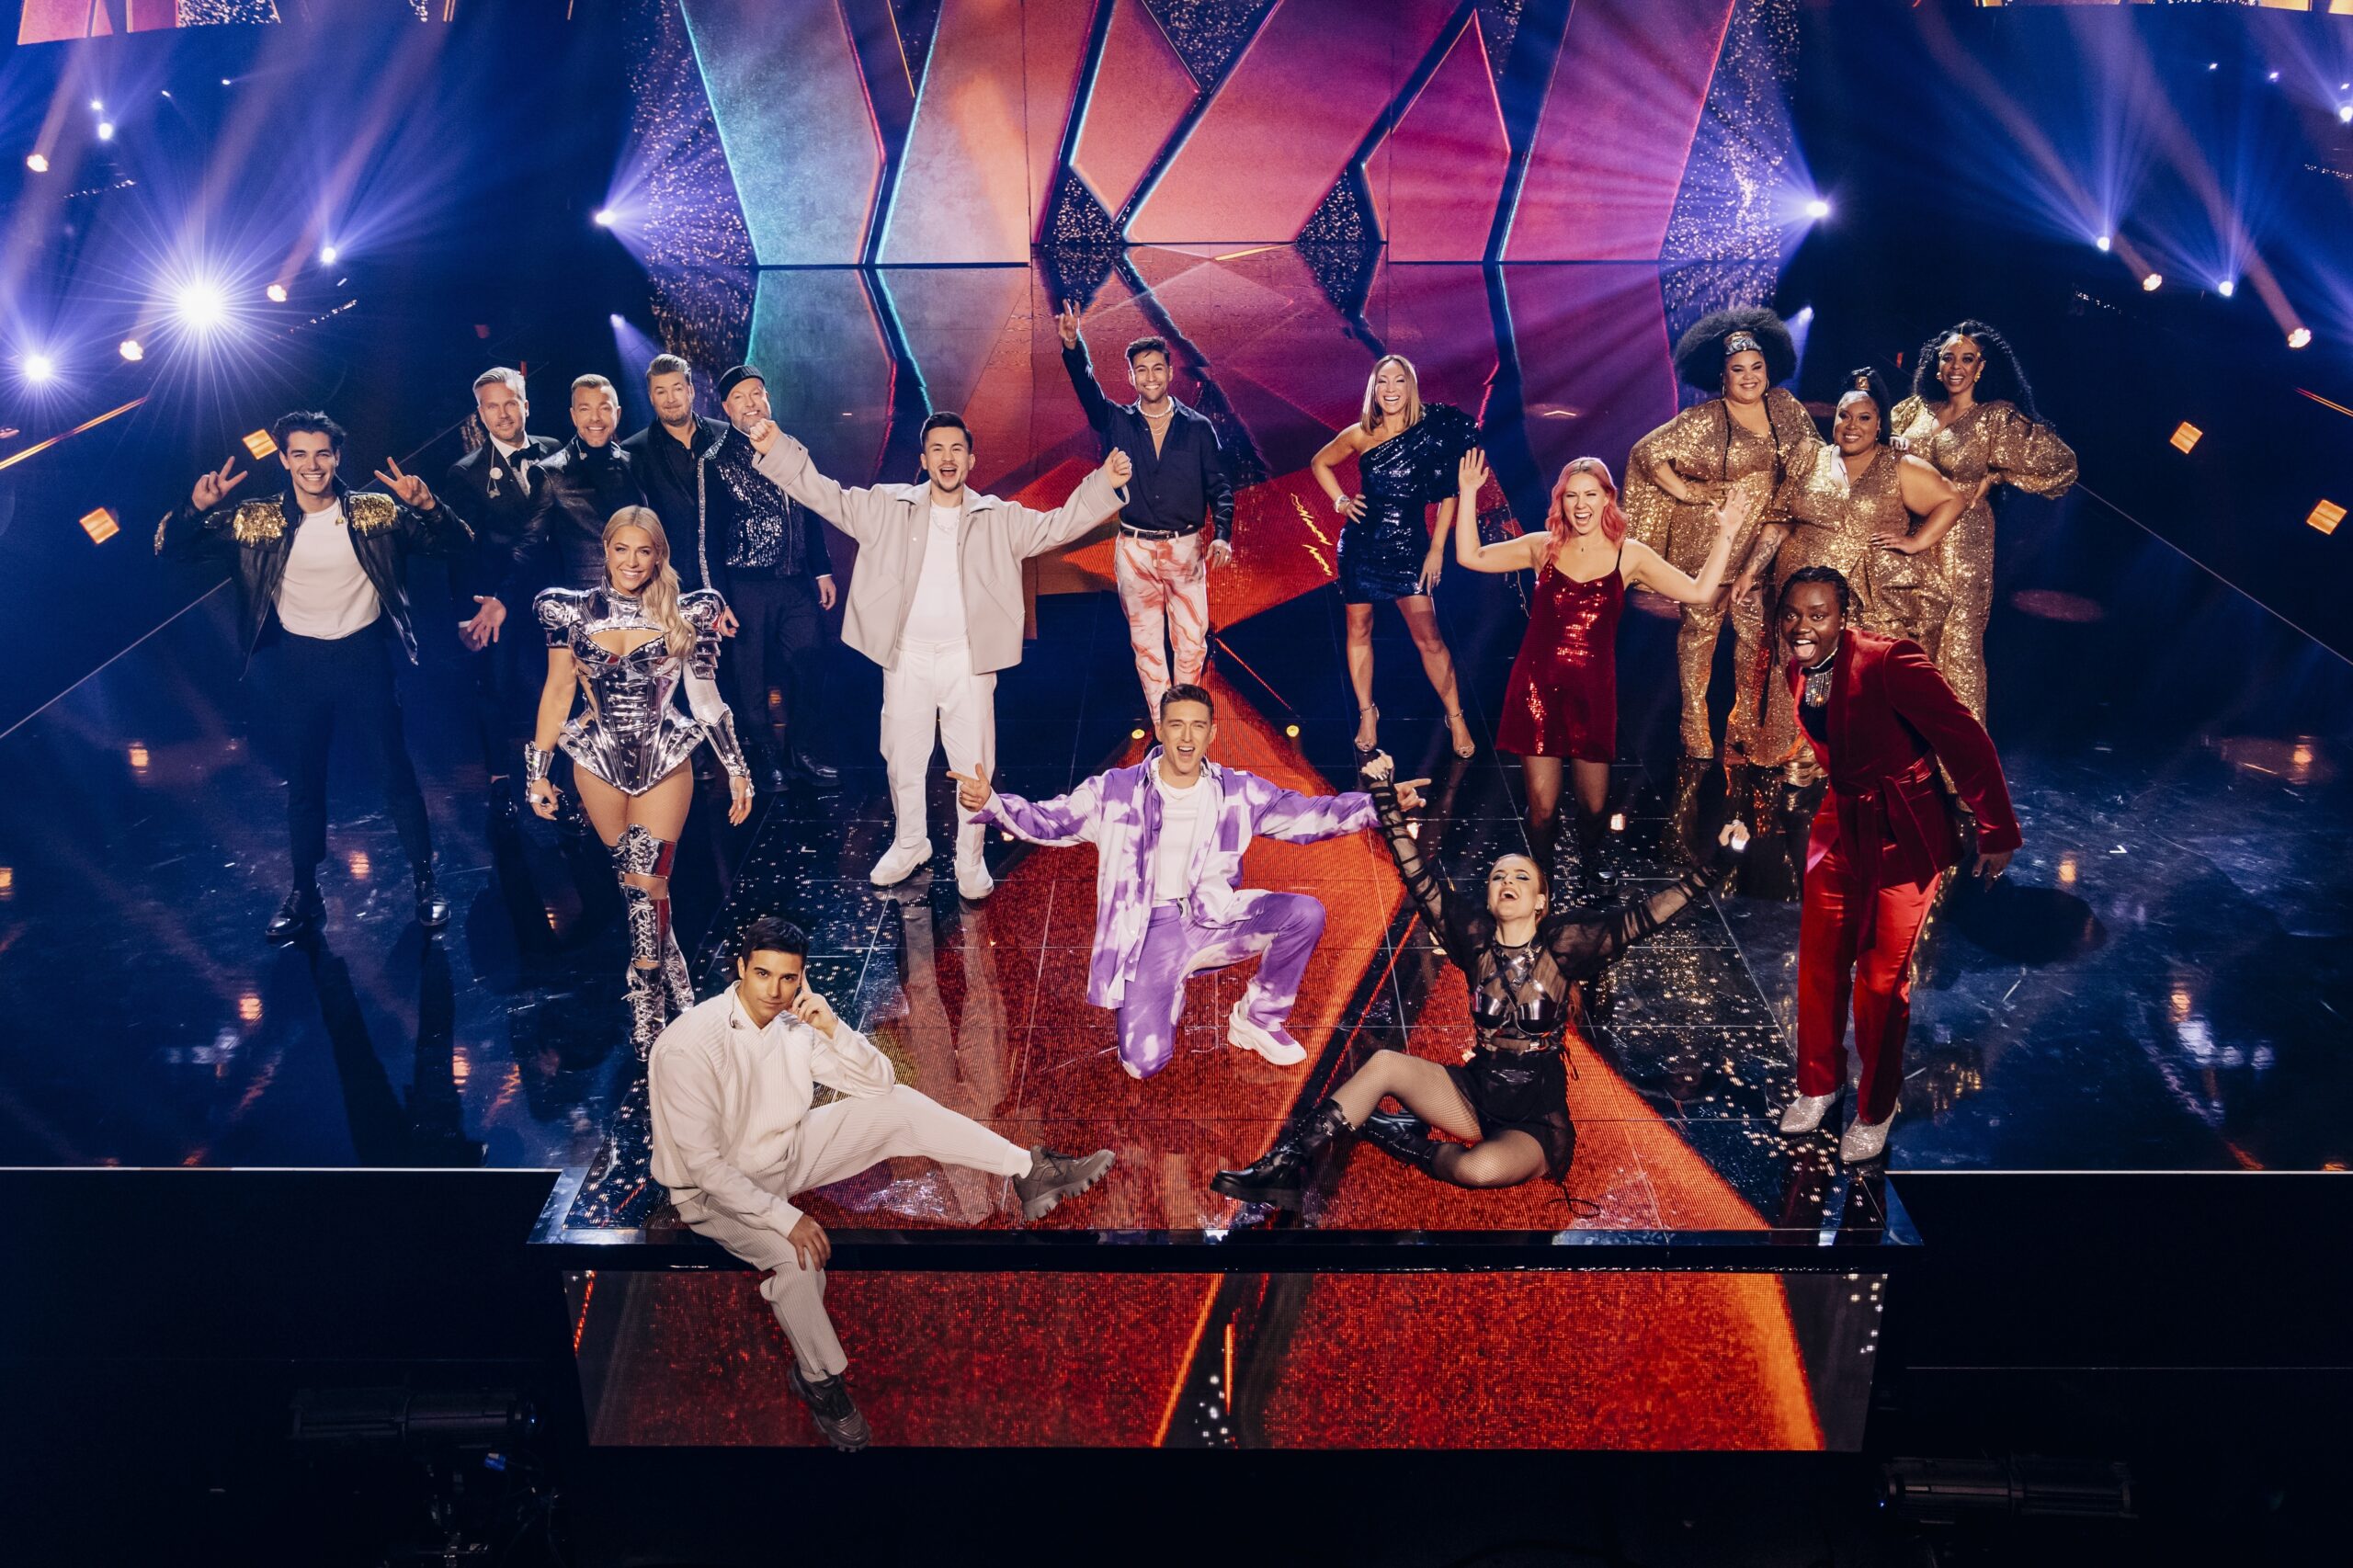 Tonight: Melodifestivalen’s 2021 Grand Final takes place in Sweden